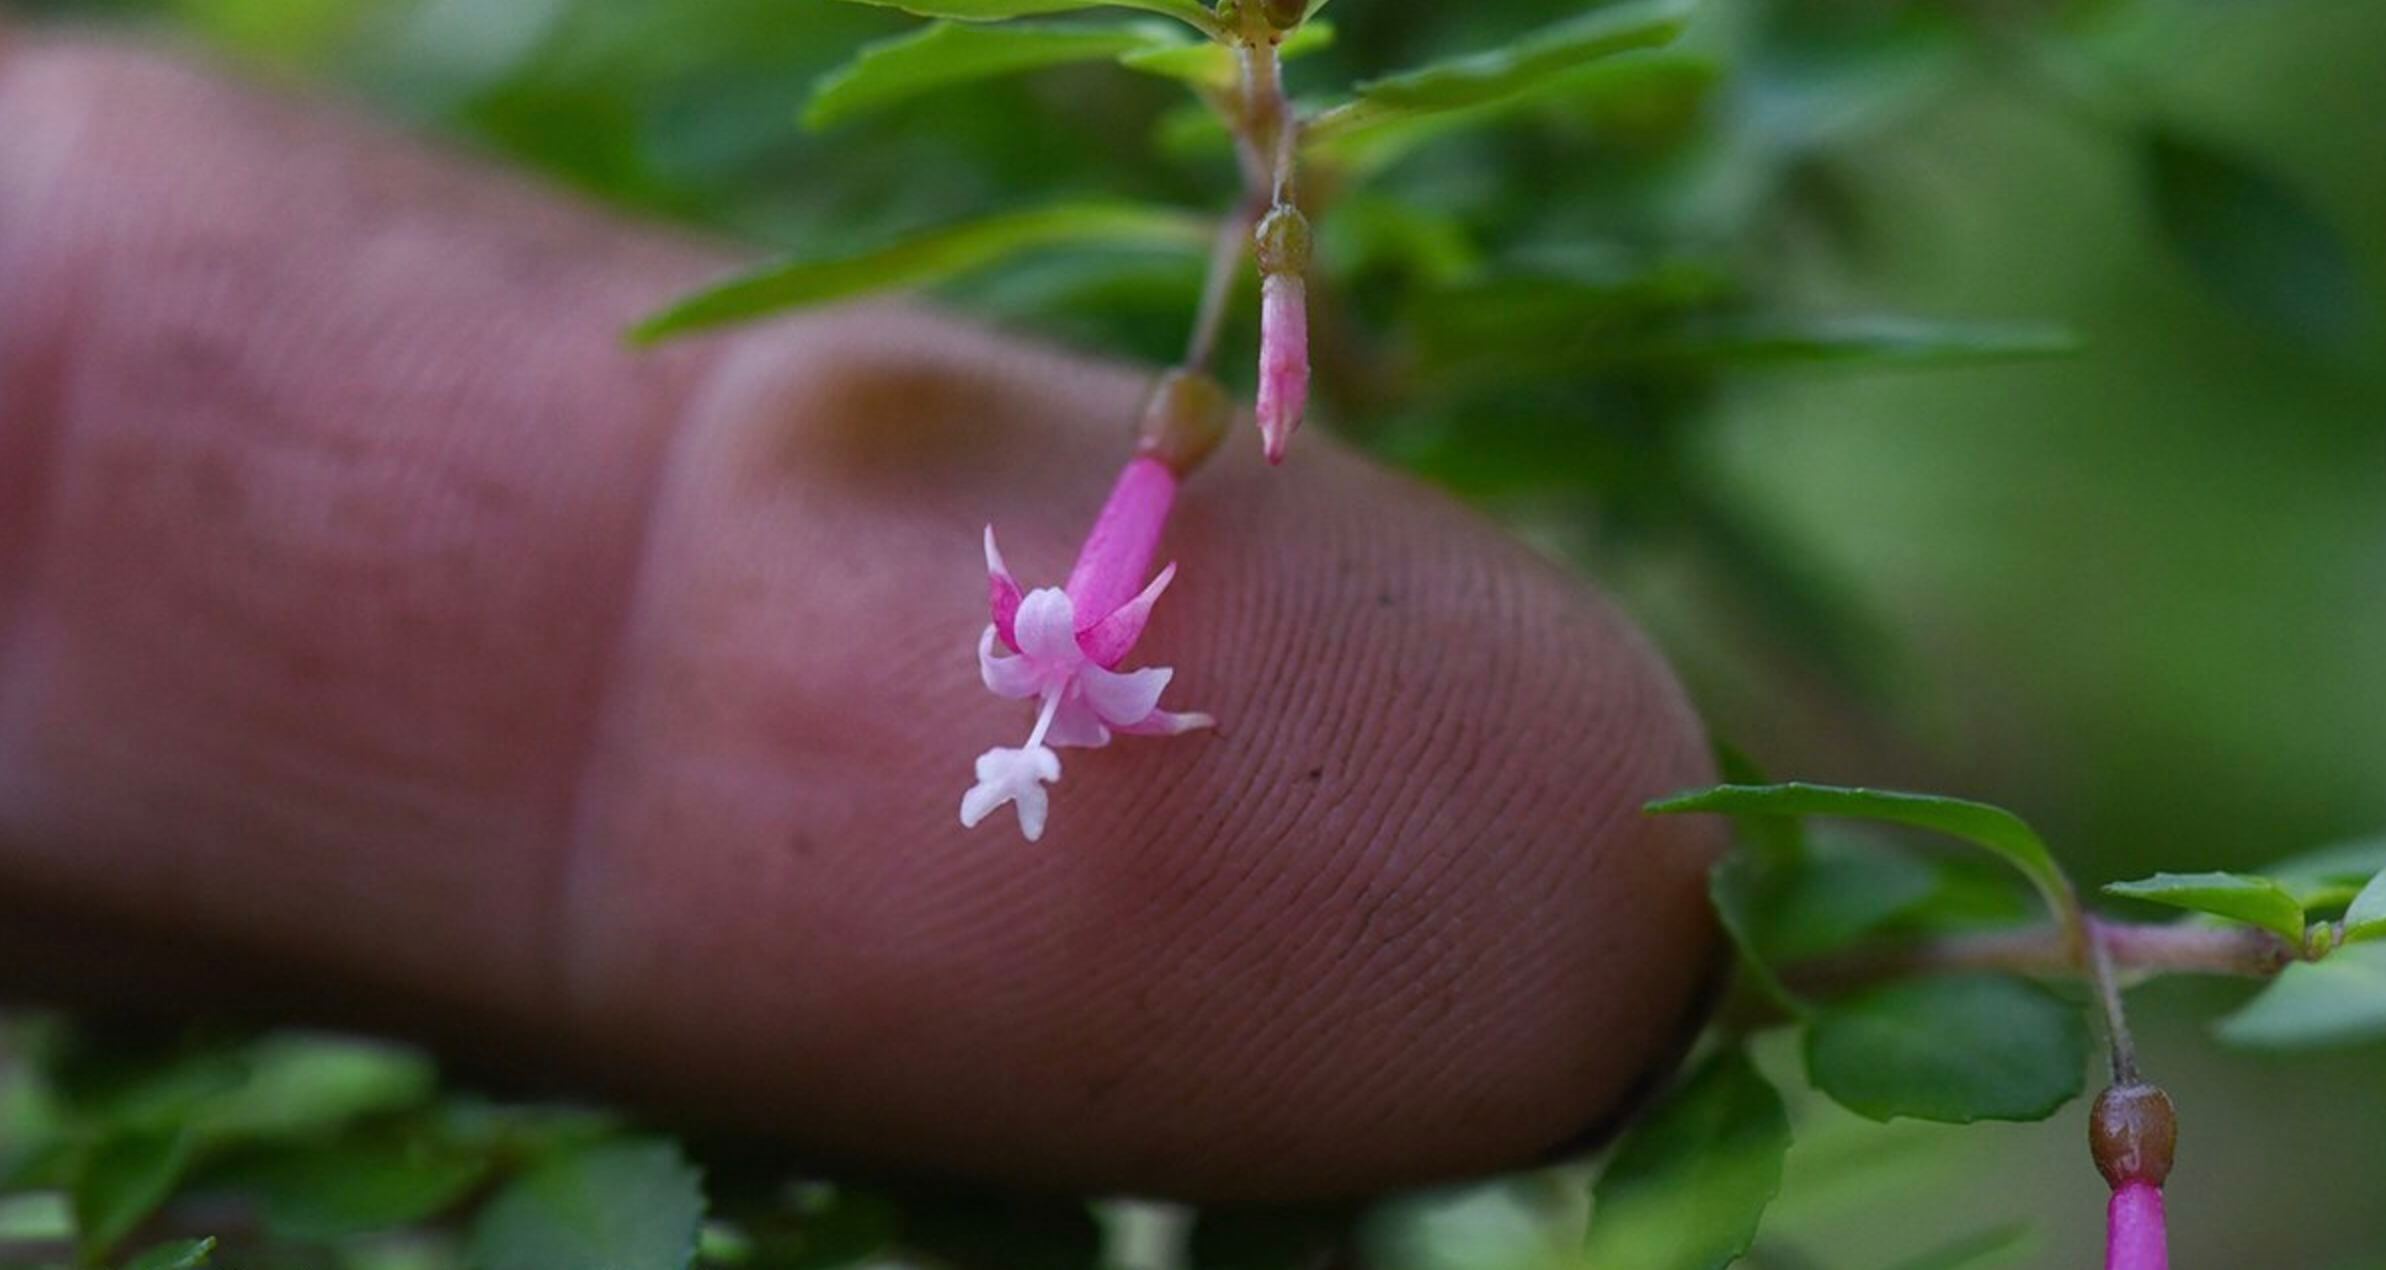 This is the smallest fuchsia I've ever seen: Fuchsia microphylla, from Central America. #fuchsia #倒挂金钟